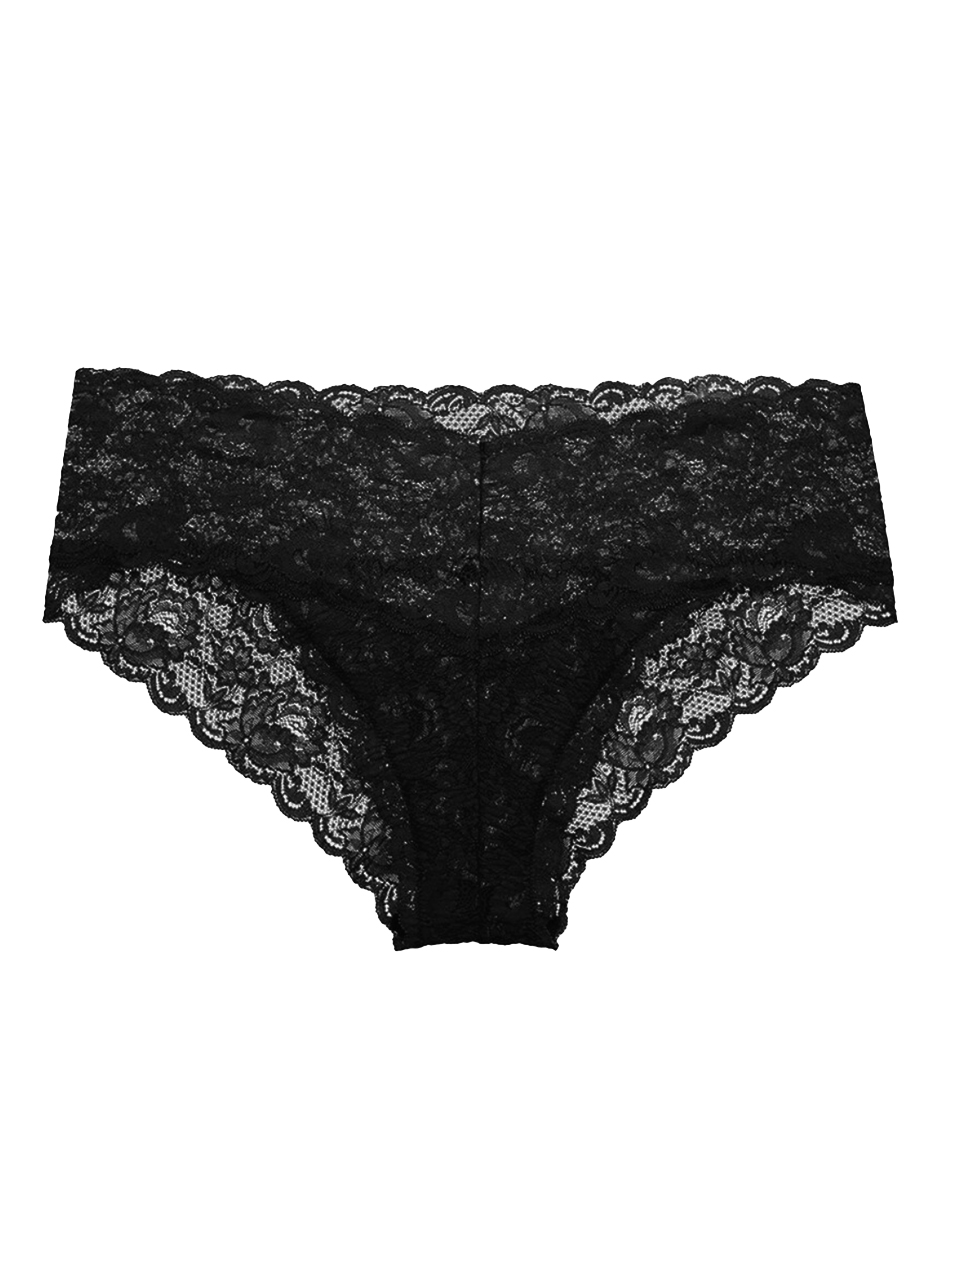 COSABELLA Never Say Never Hottie Low Rise Boyshort in Black Product Shot 